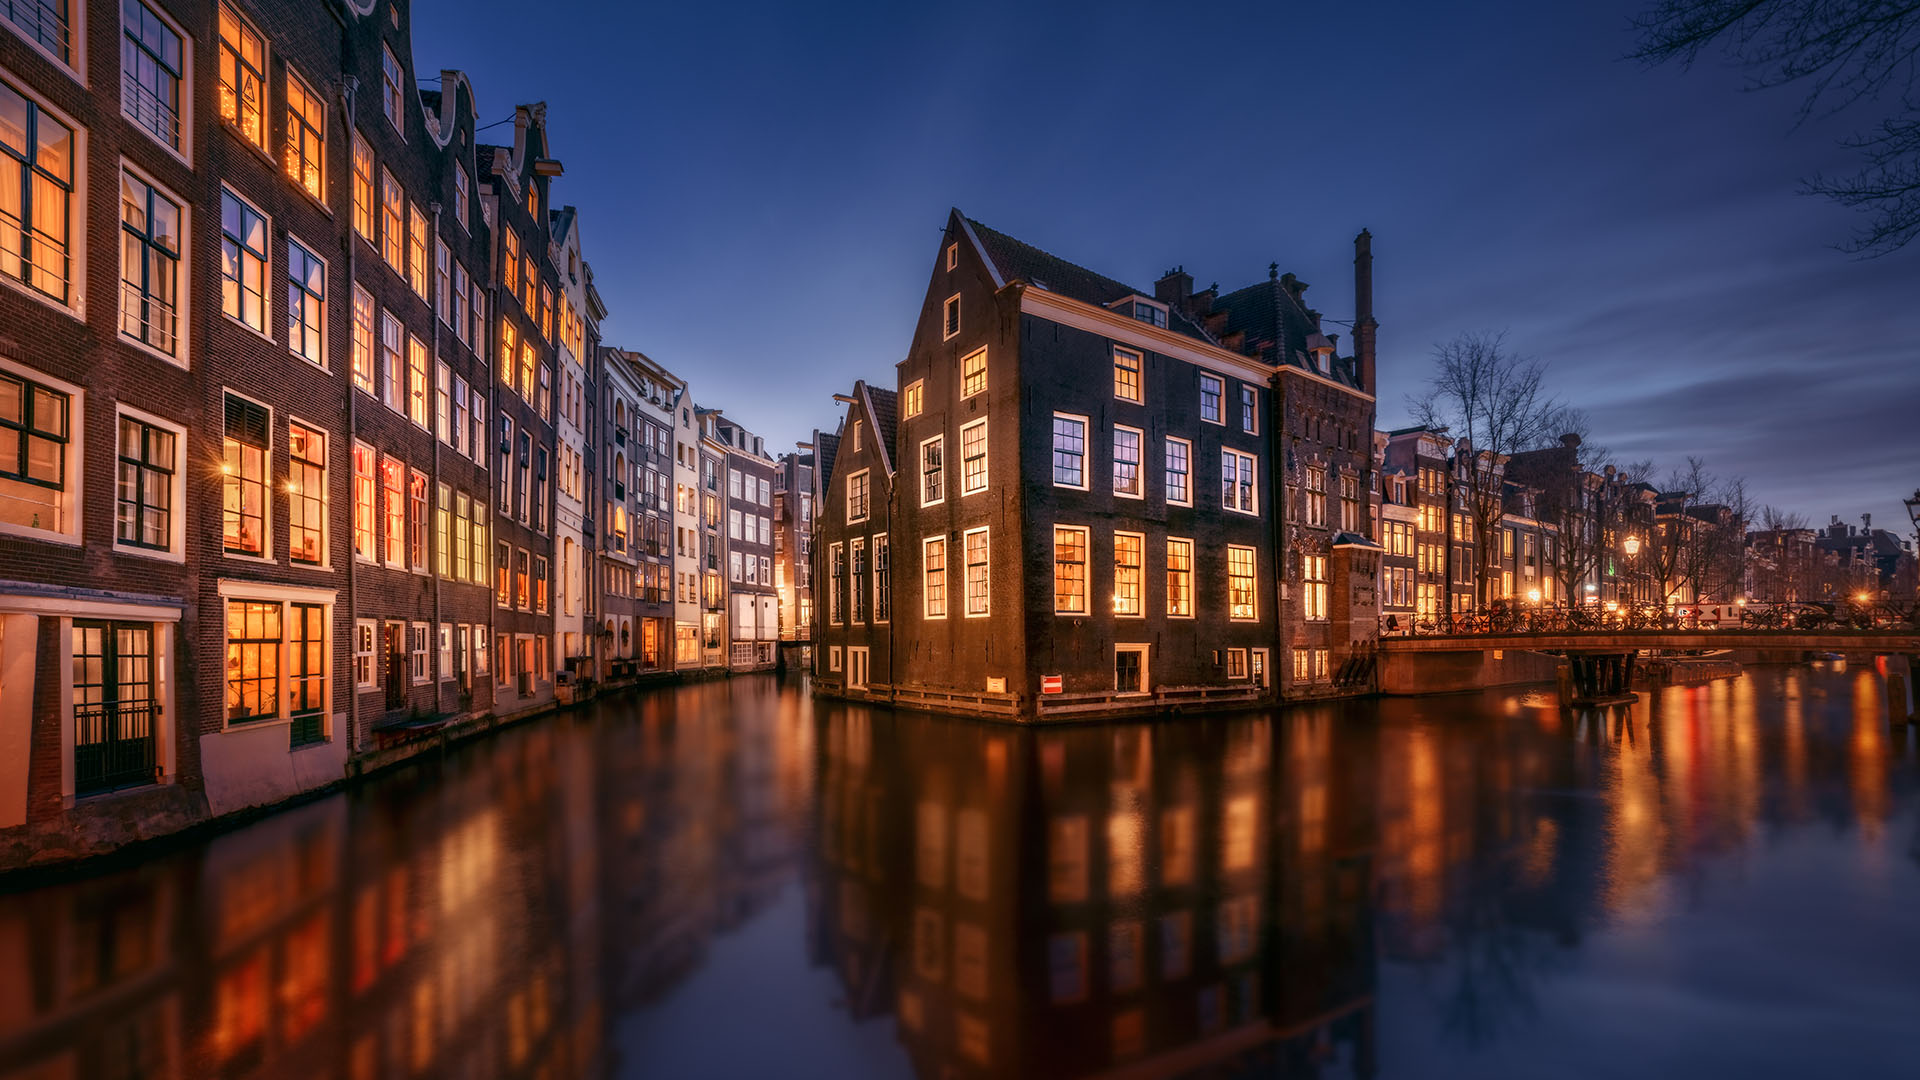 Amsterdam tranquil canal scene with canal houses by night, Netherlands ...